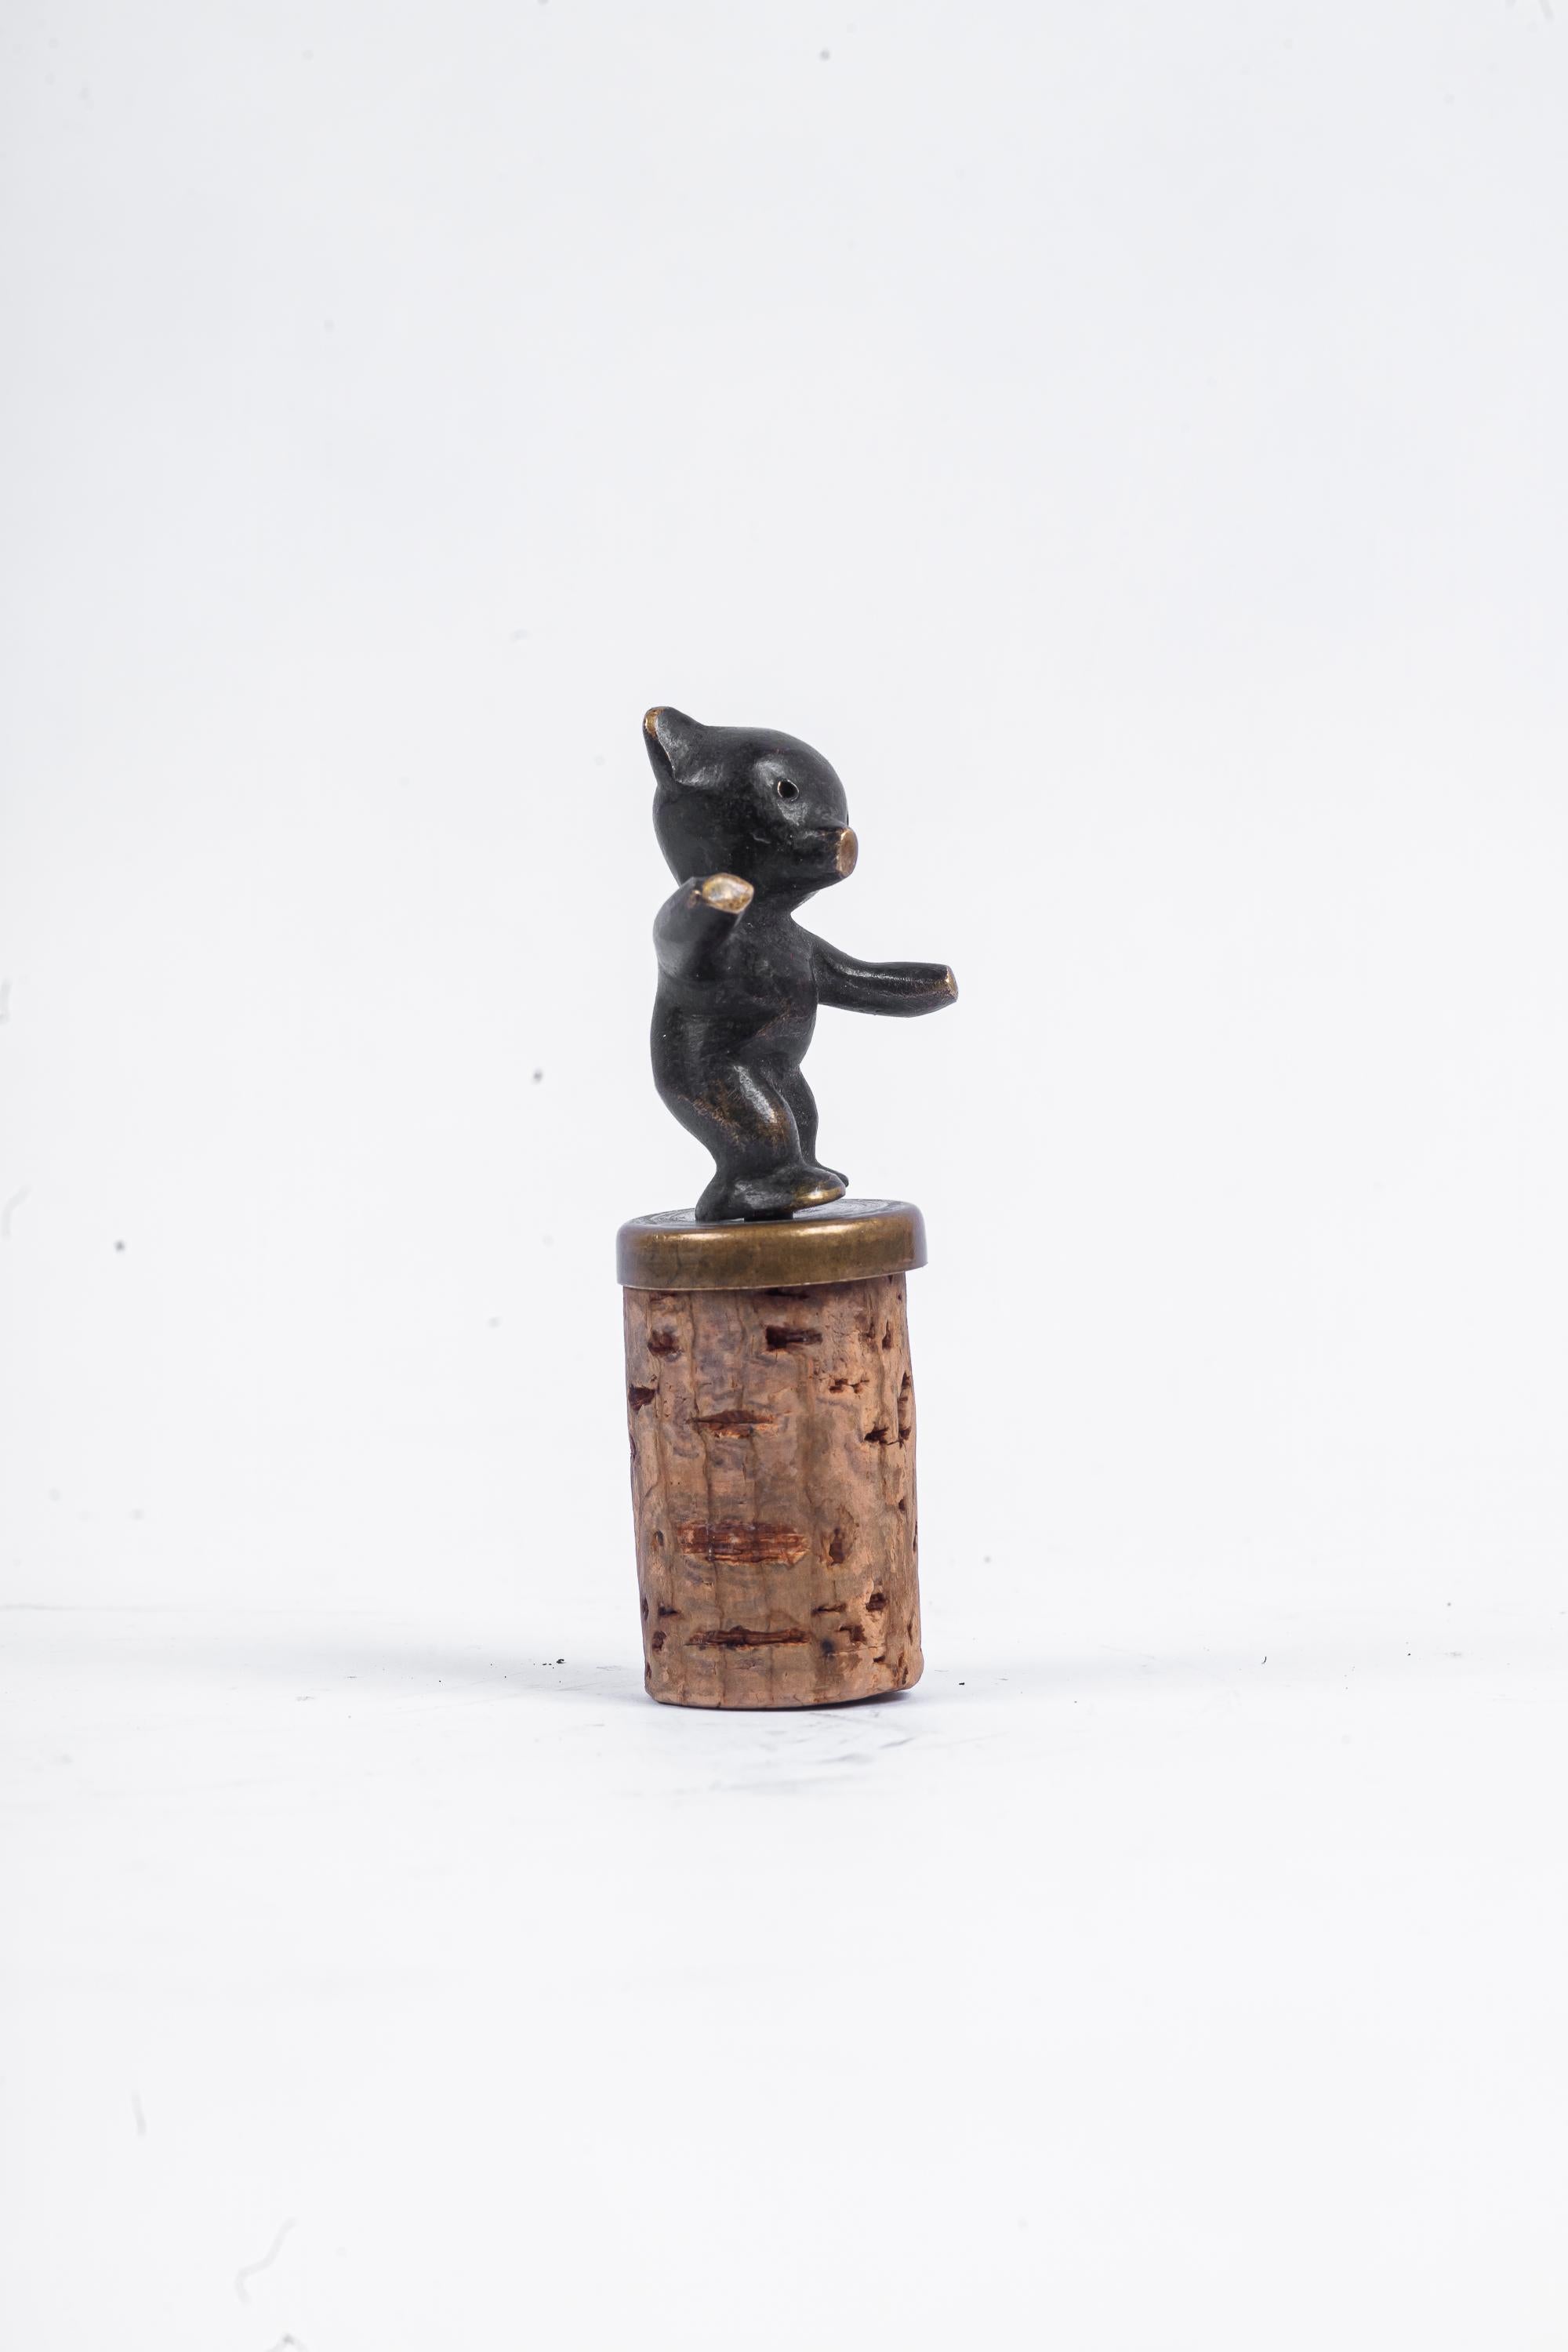 Bear Bottle Stopper by Walter Bosse around 1950s
Original condition